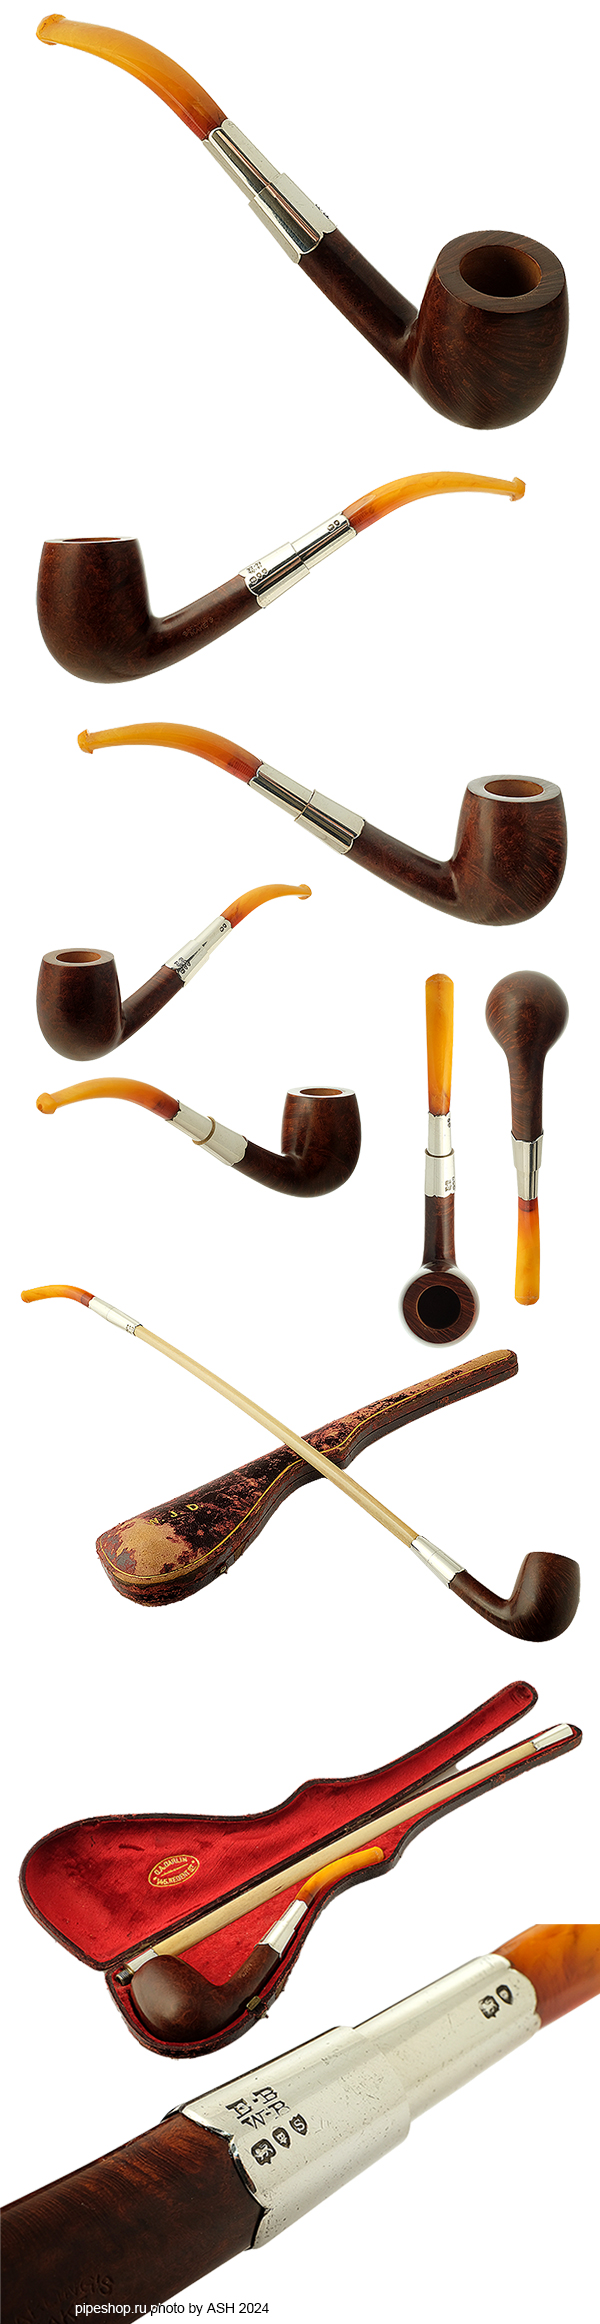   BARLING`S MAKE SMOOTH BENT BILLIARD WITH AMBER MOUTHPIECE ALBATROSS BONE AND CASE (1917) ESTATE NEW UNSMOKED